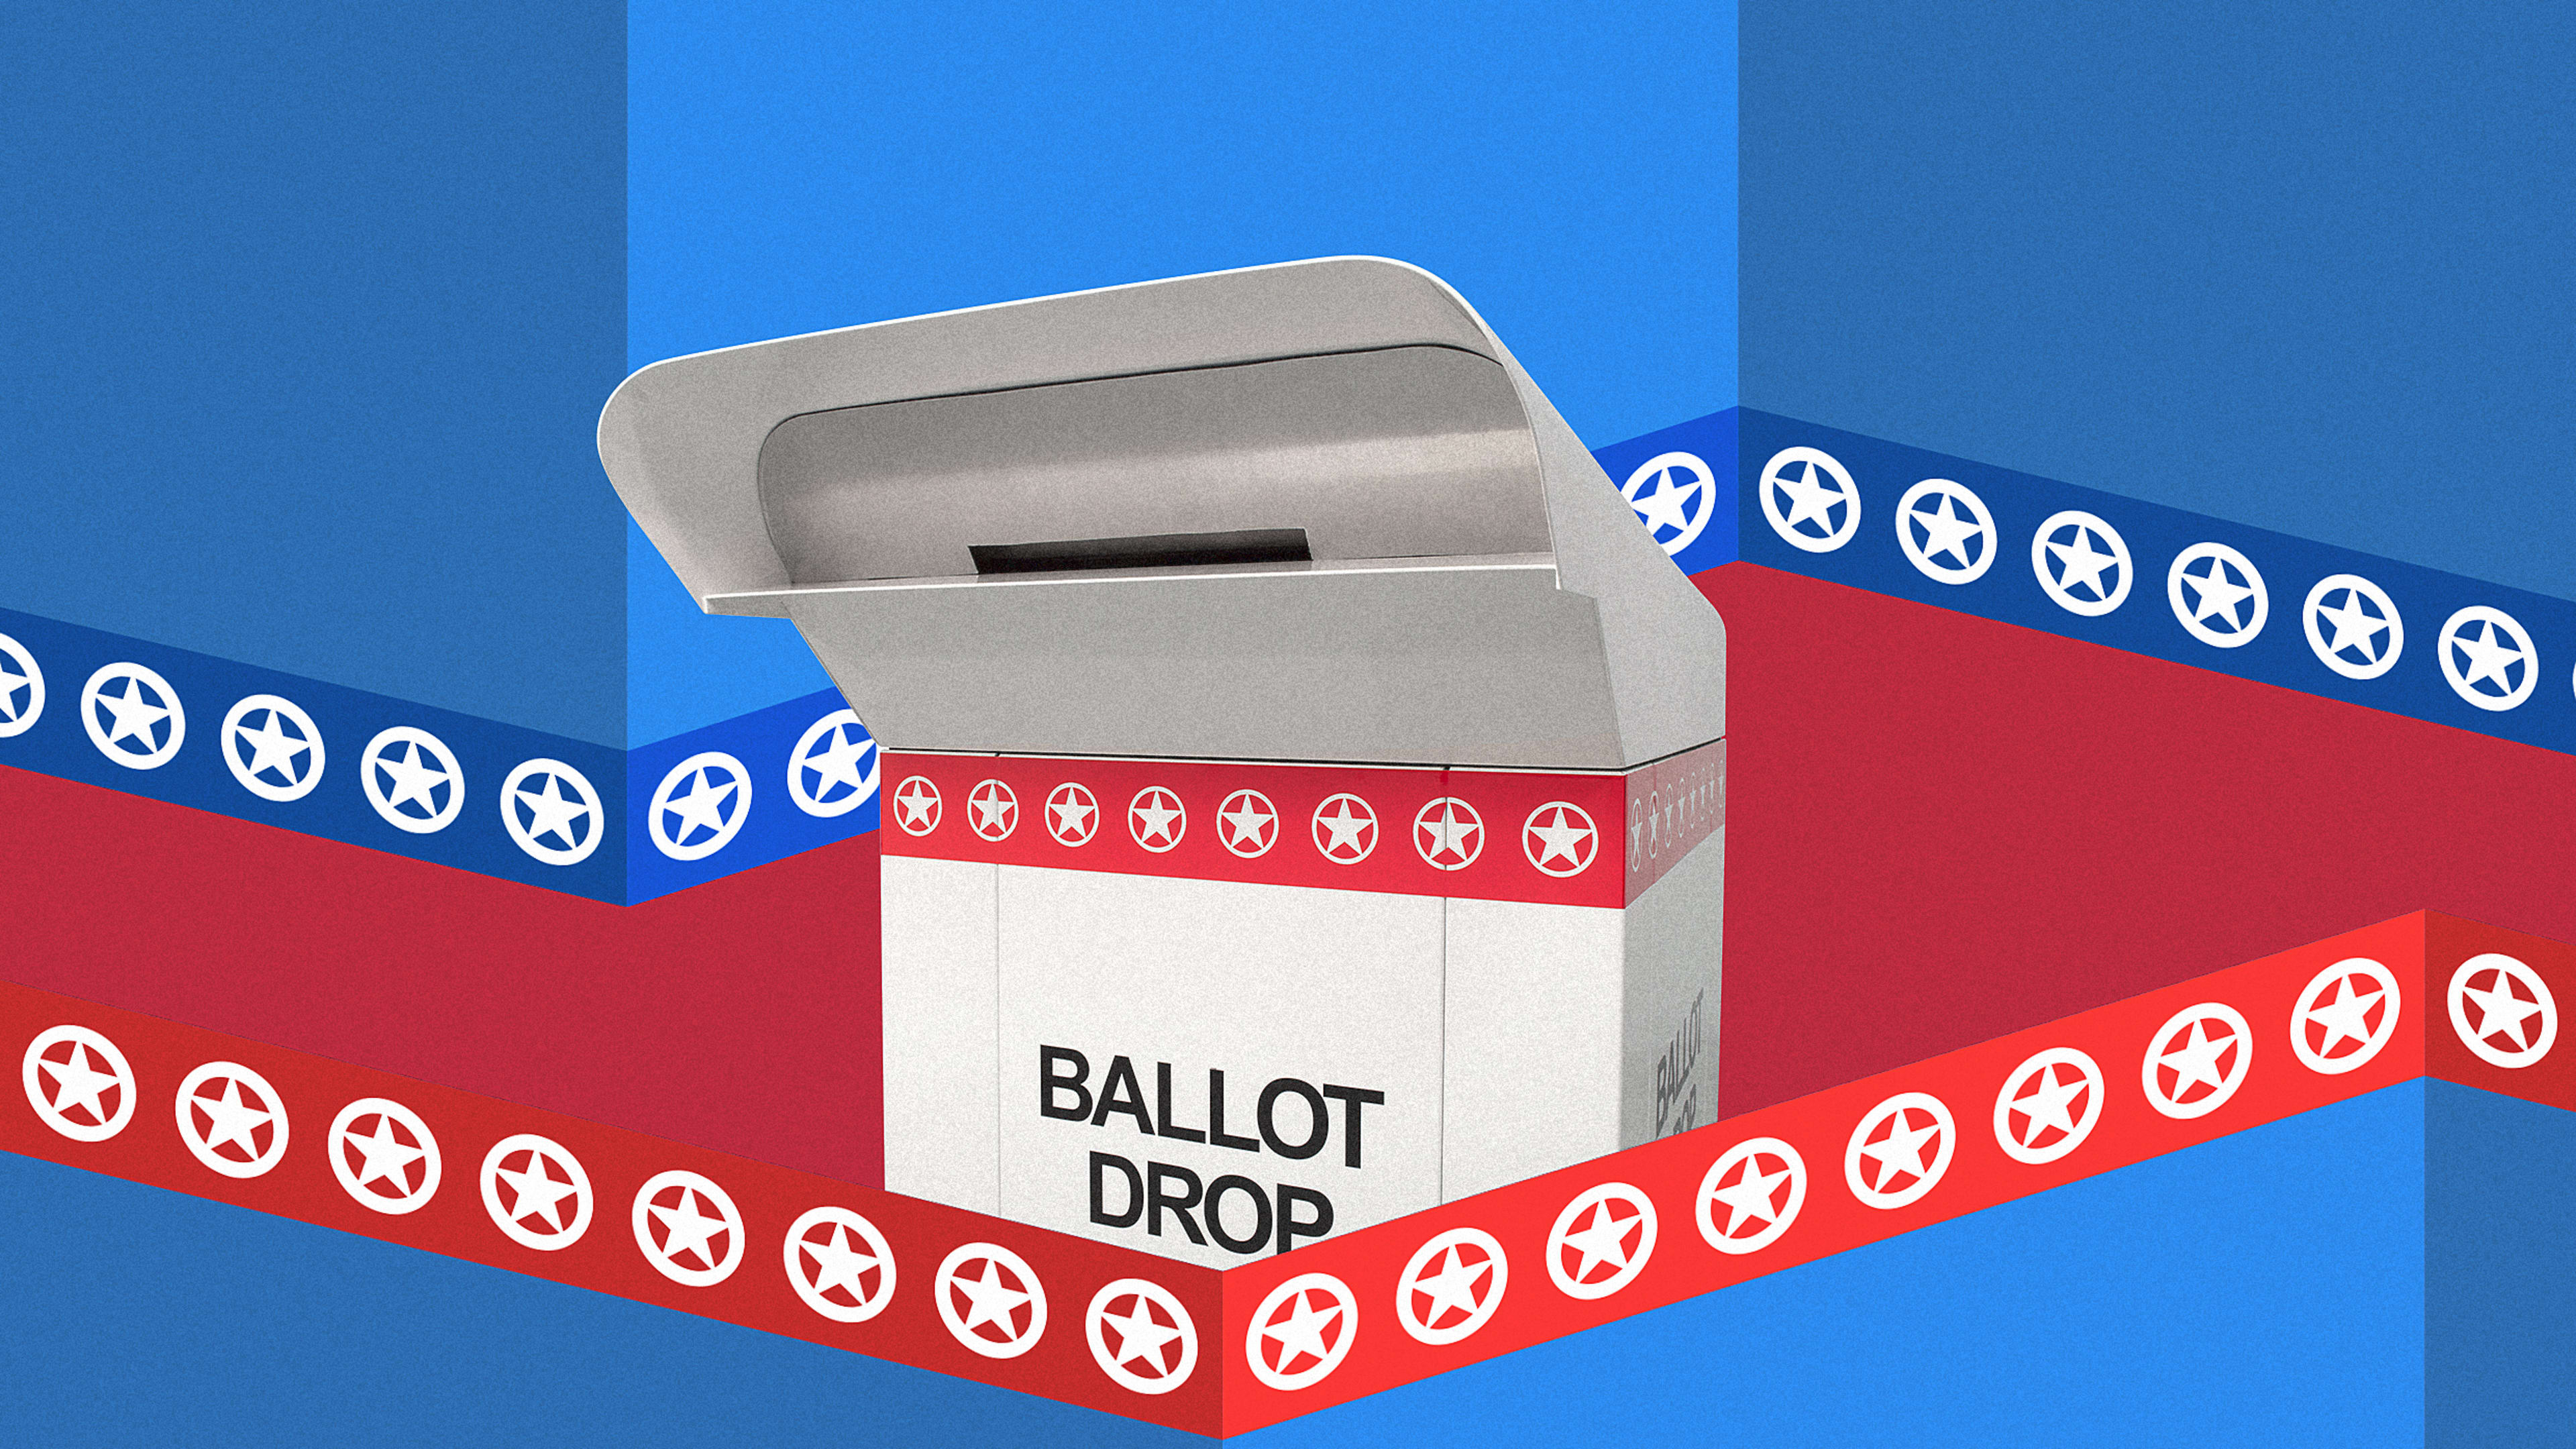 Perfectly safe, wildly underused: The ballot box epitomizes all that’s wrong with the 2020 election